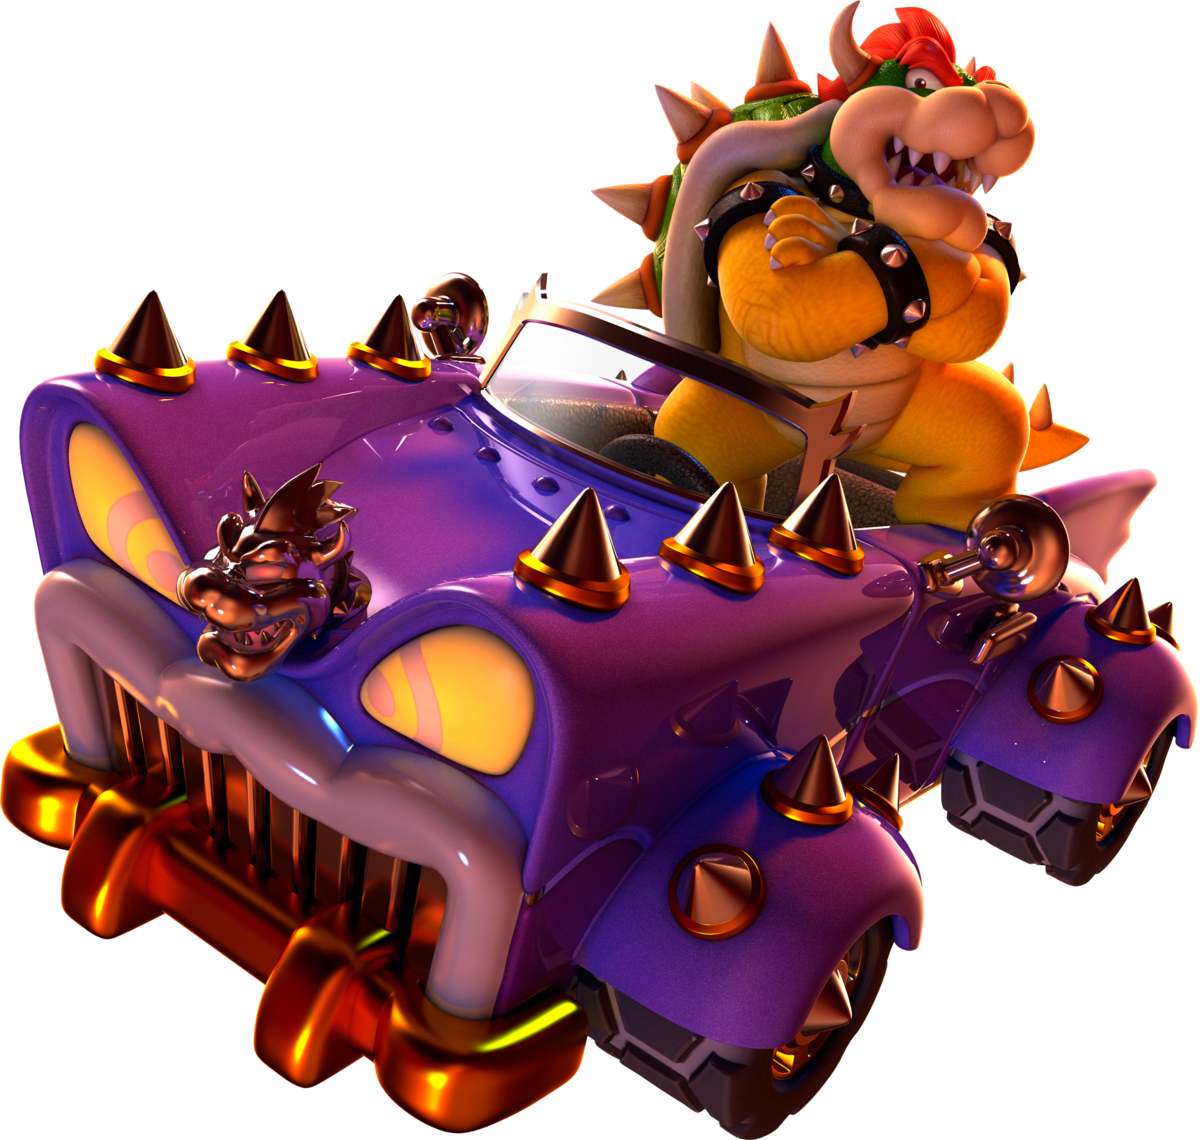 Bowser, Paper Mario Wiki